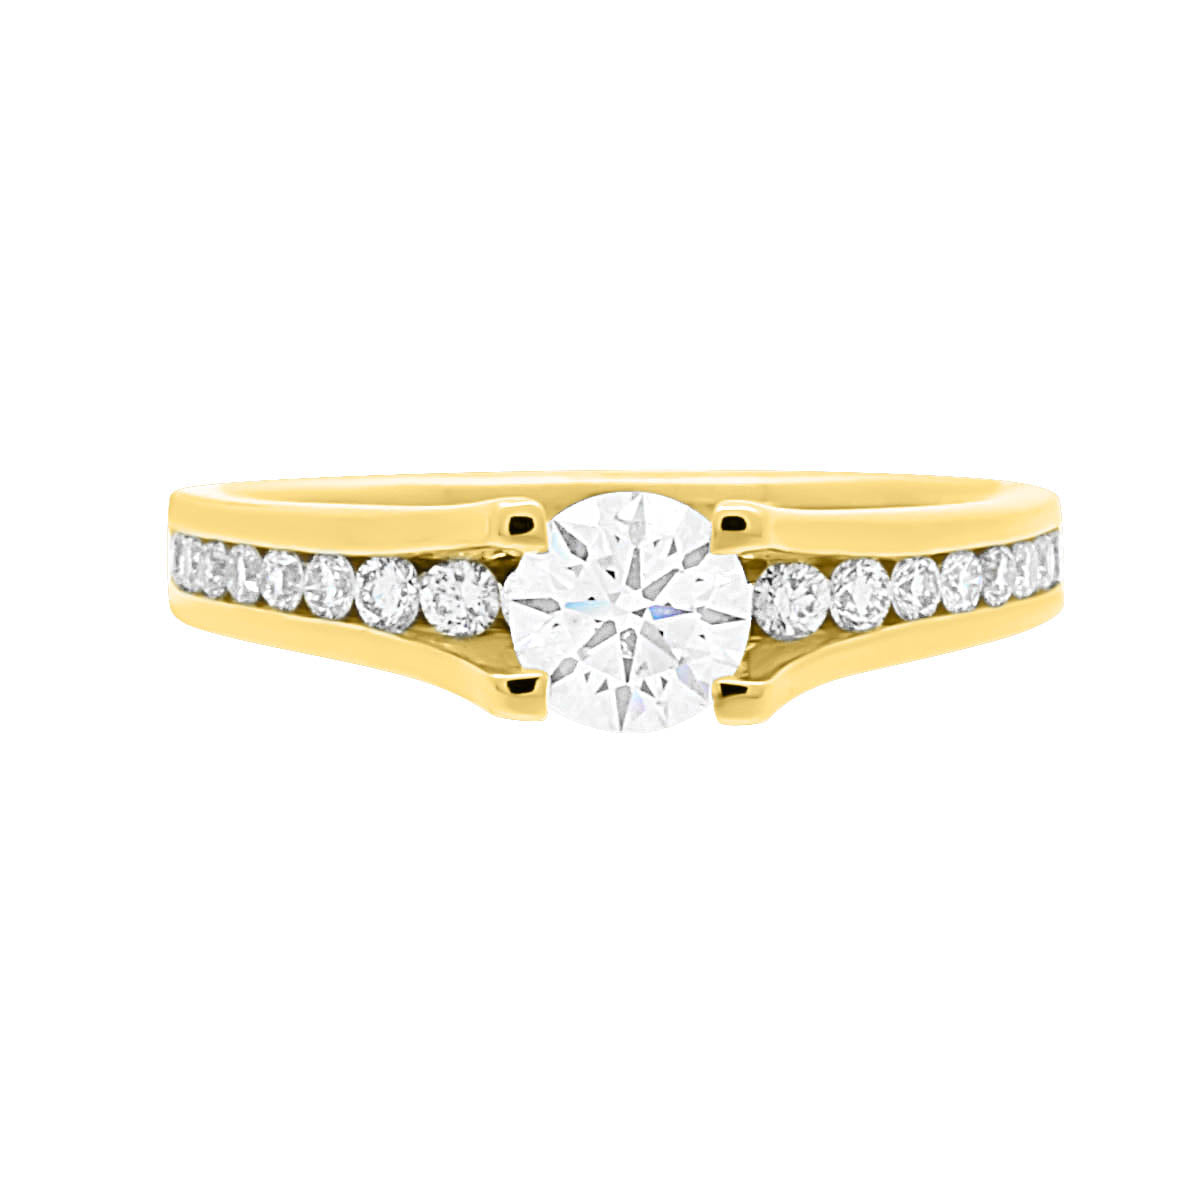 Floating Diamond With Channel Set Rounds SET IN YELLOW GOLD